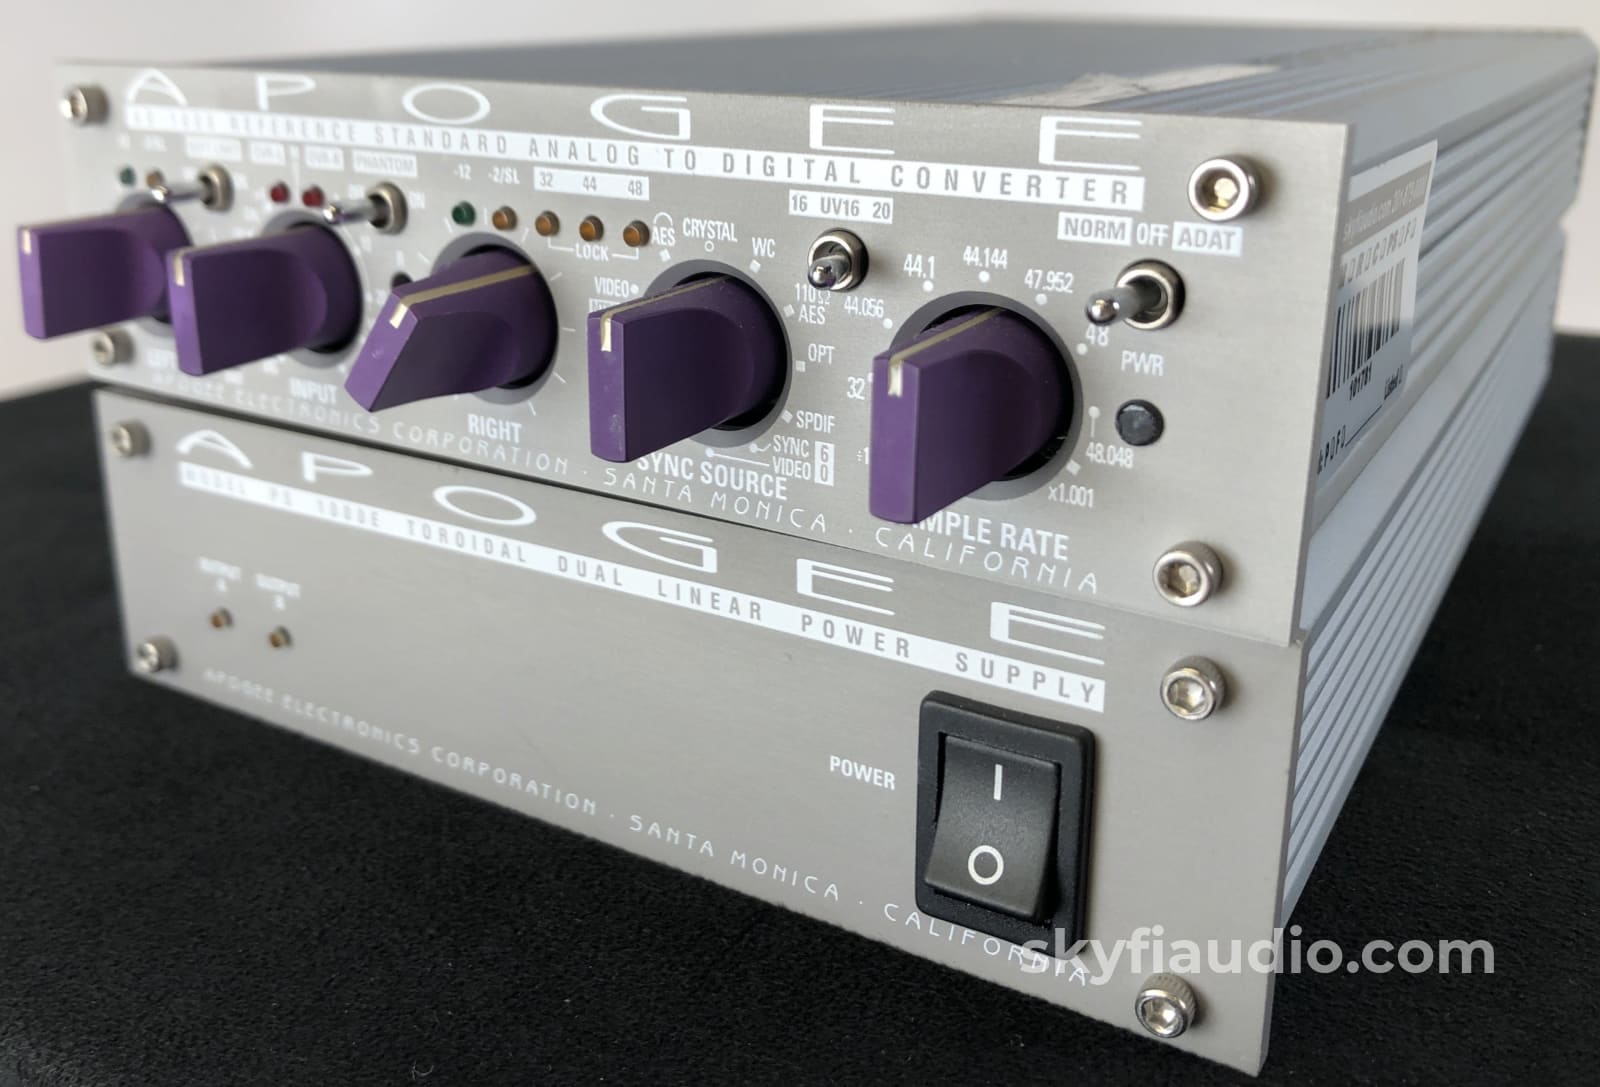 Apogee Ad-1000 Reference Standard 20-Bit Resolution A/D Converter With Ps-1000E External Power